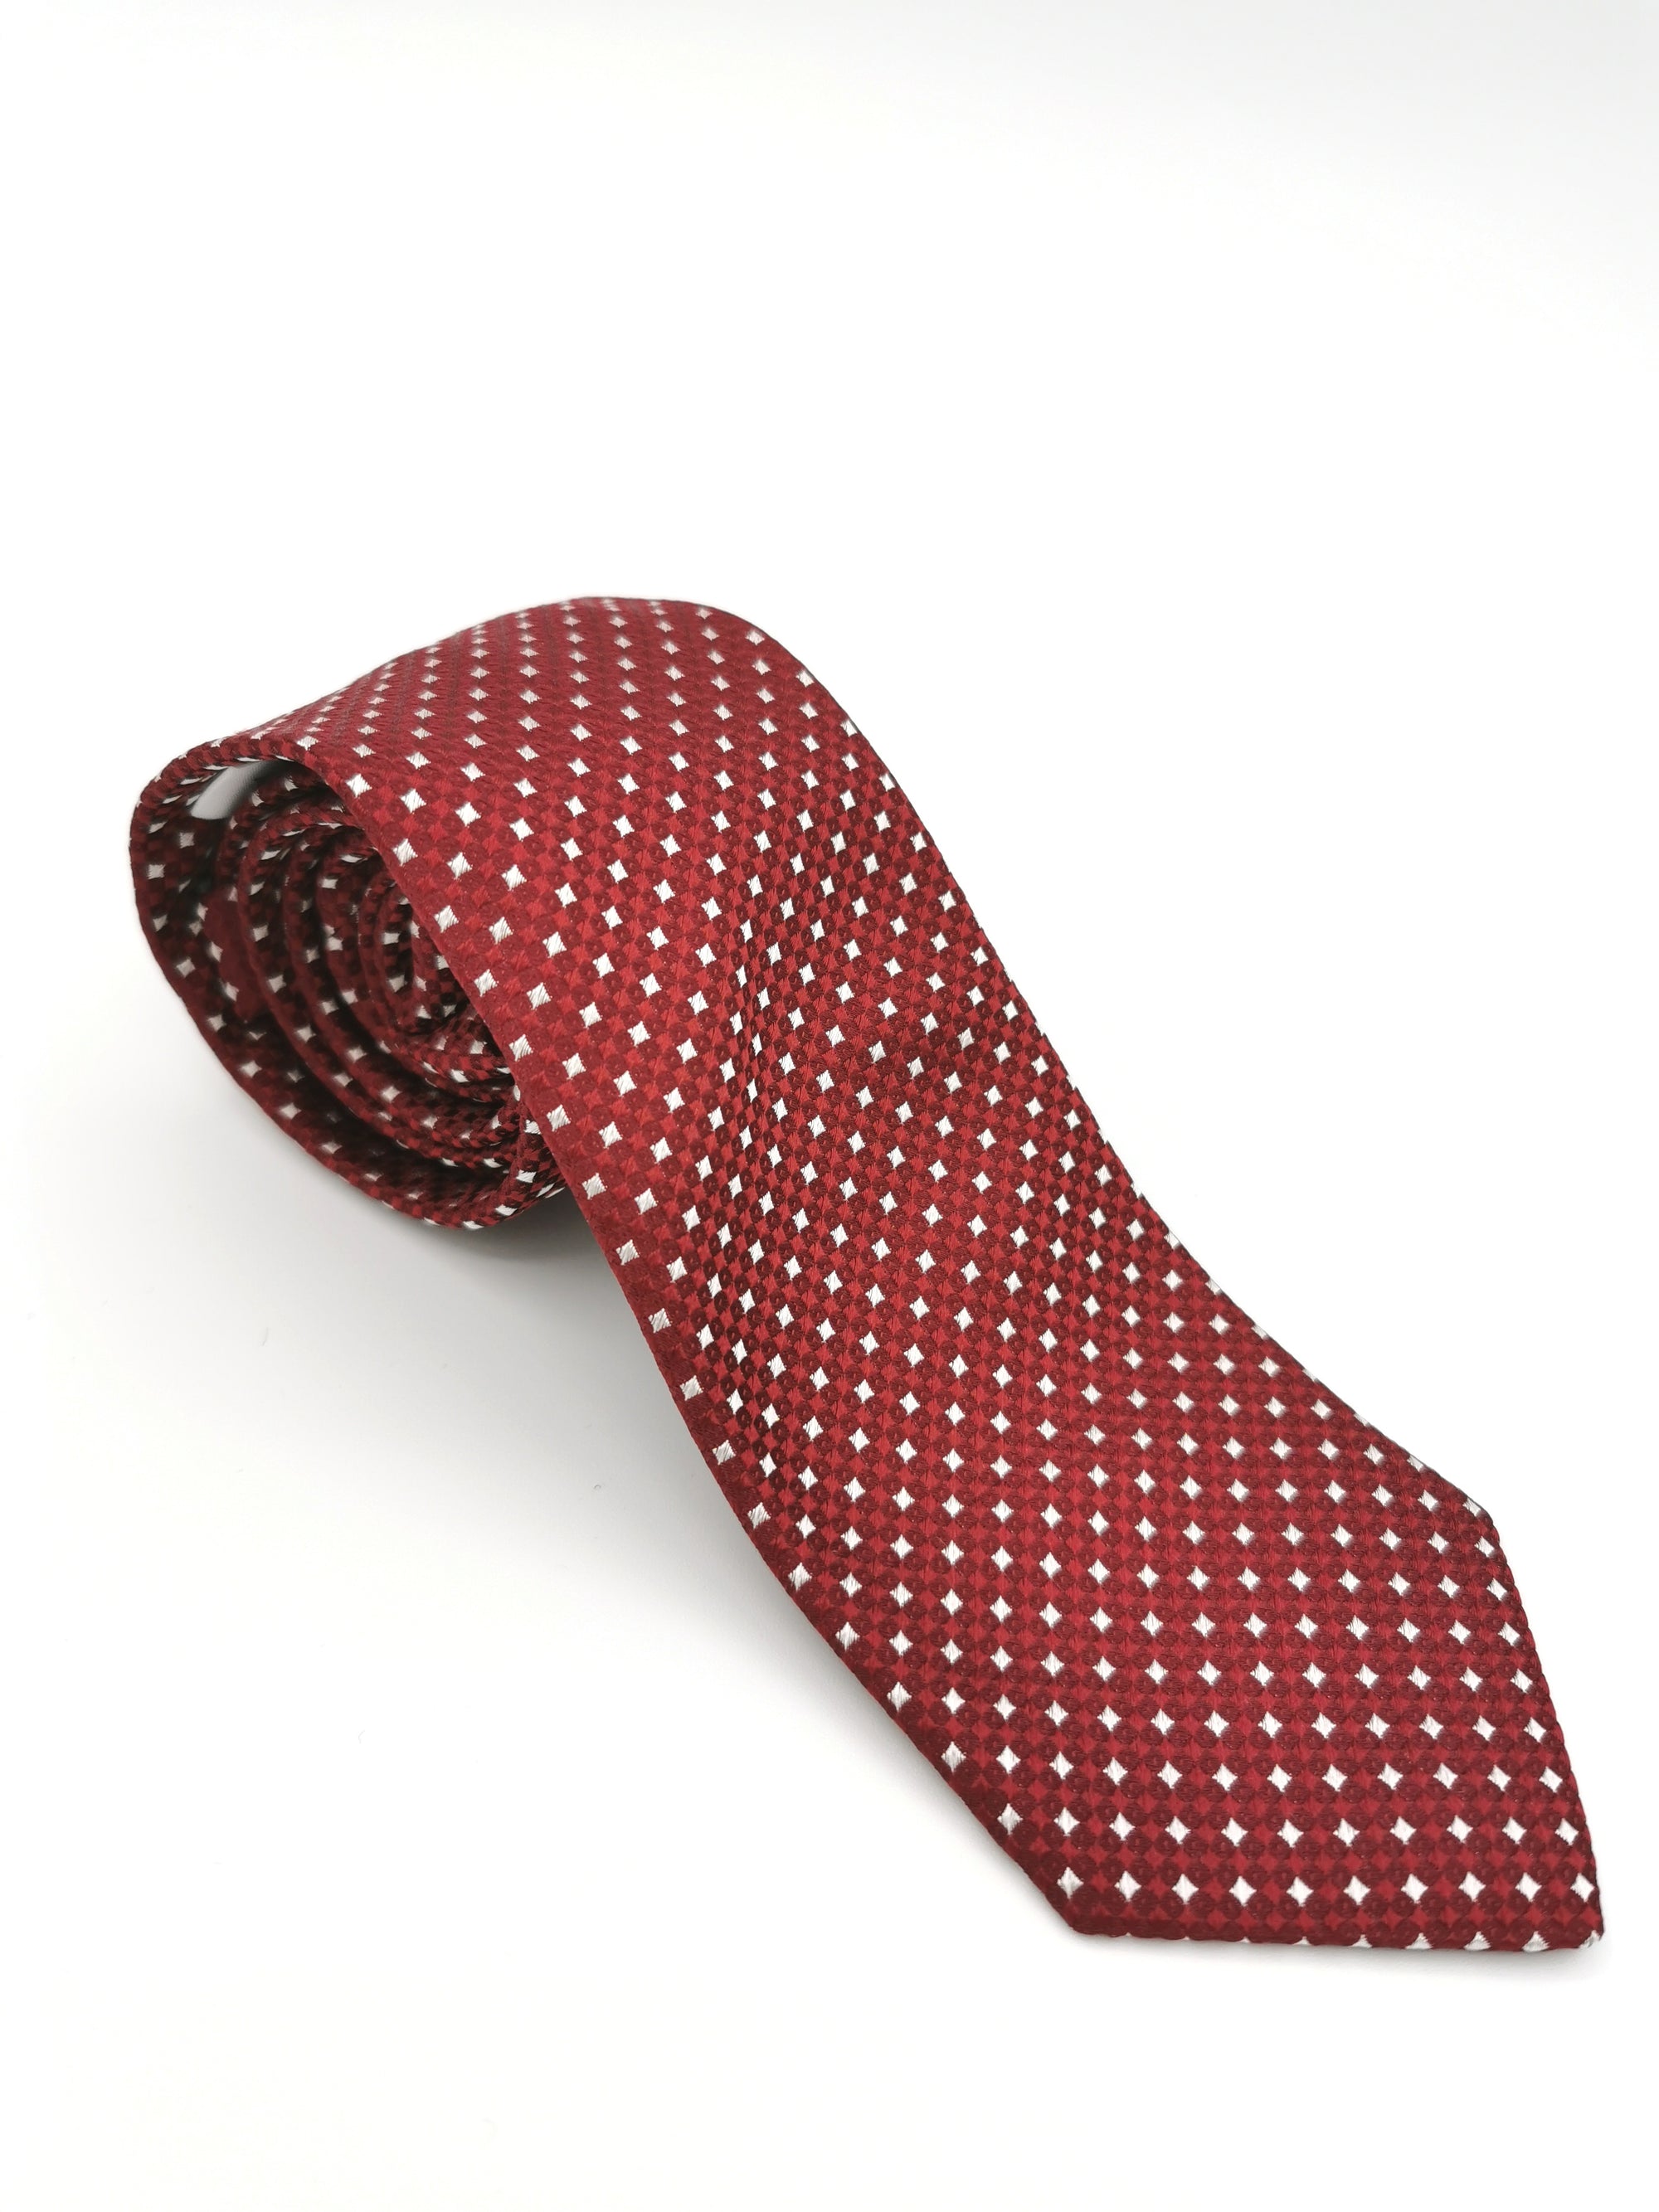 Ferala tie with red and white checkerboard pattern